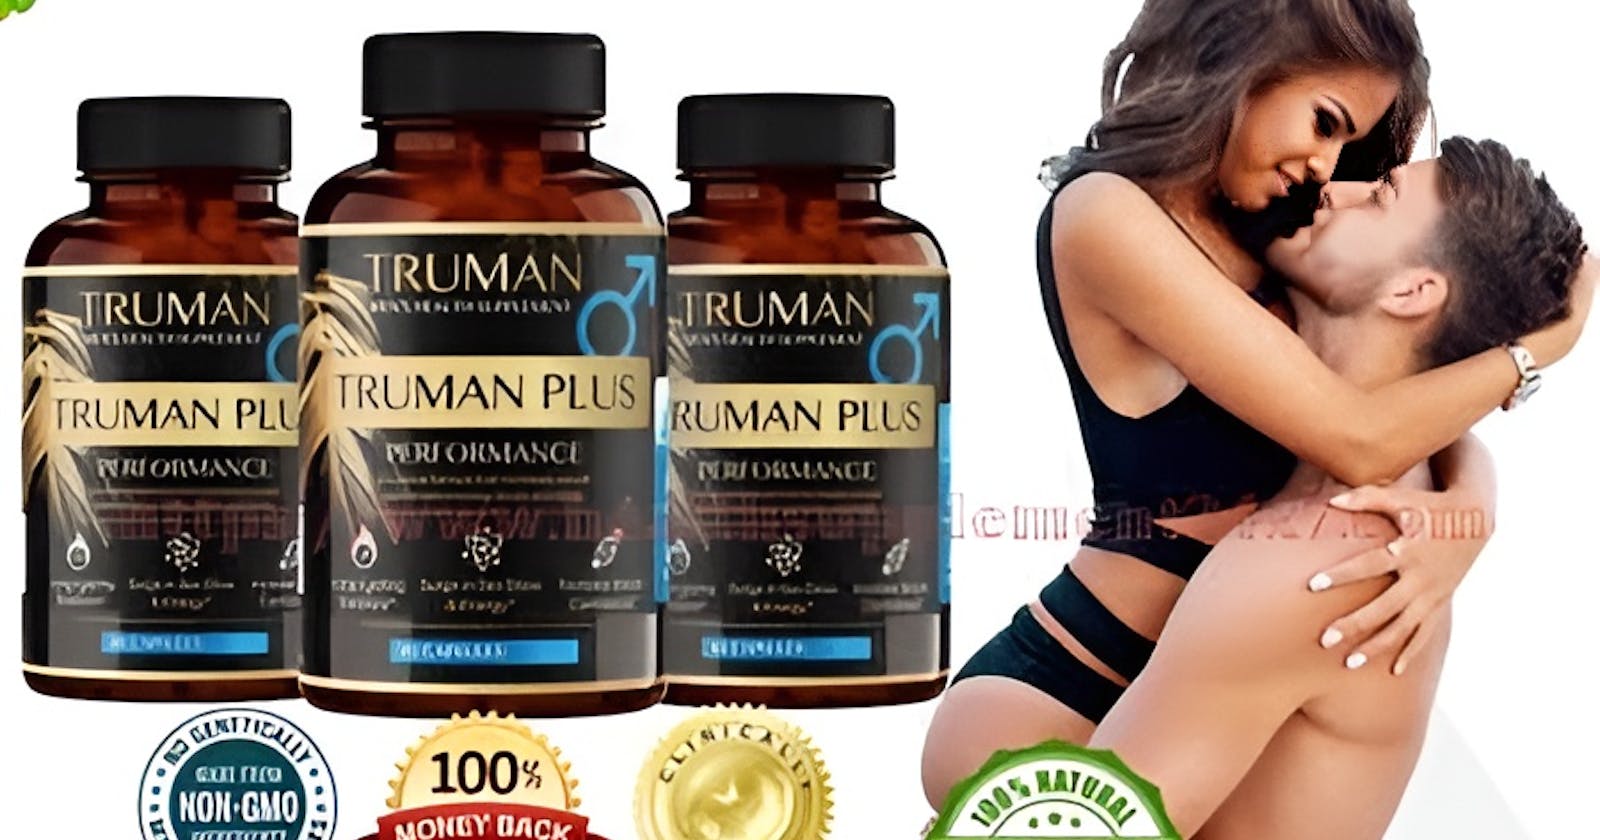 Truman Plus Reviews: Does Trueman Plus Work Or Scam? (Ingredients, Consumer Reports, Price, Pros & Cons)